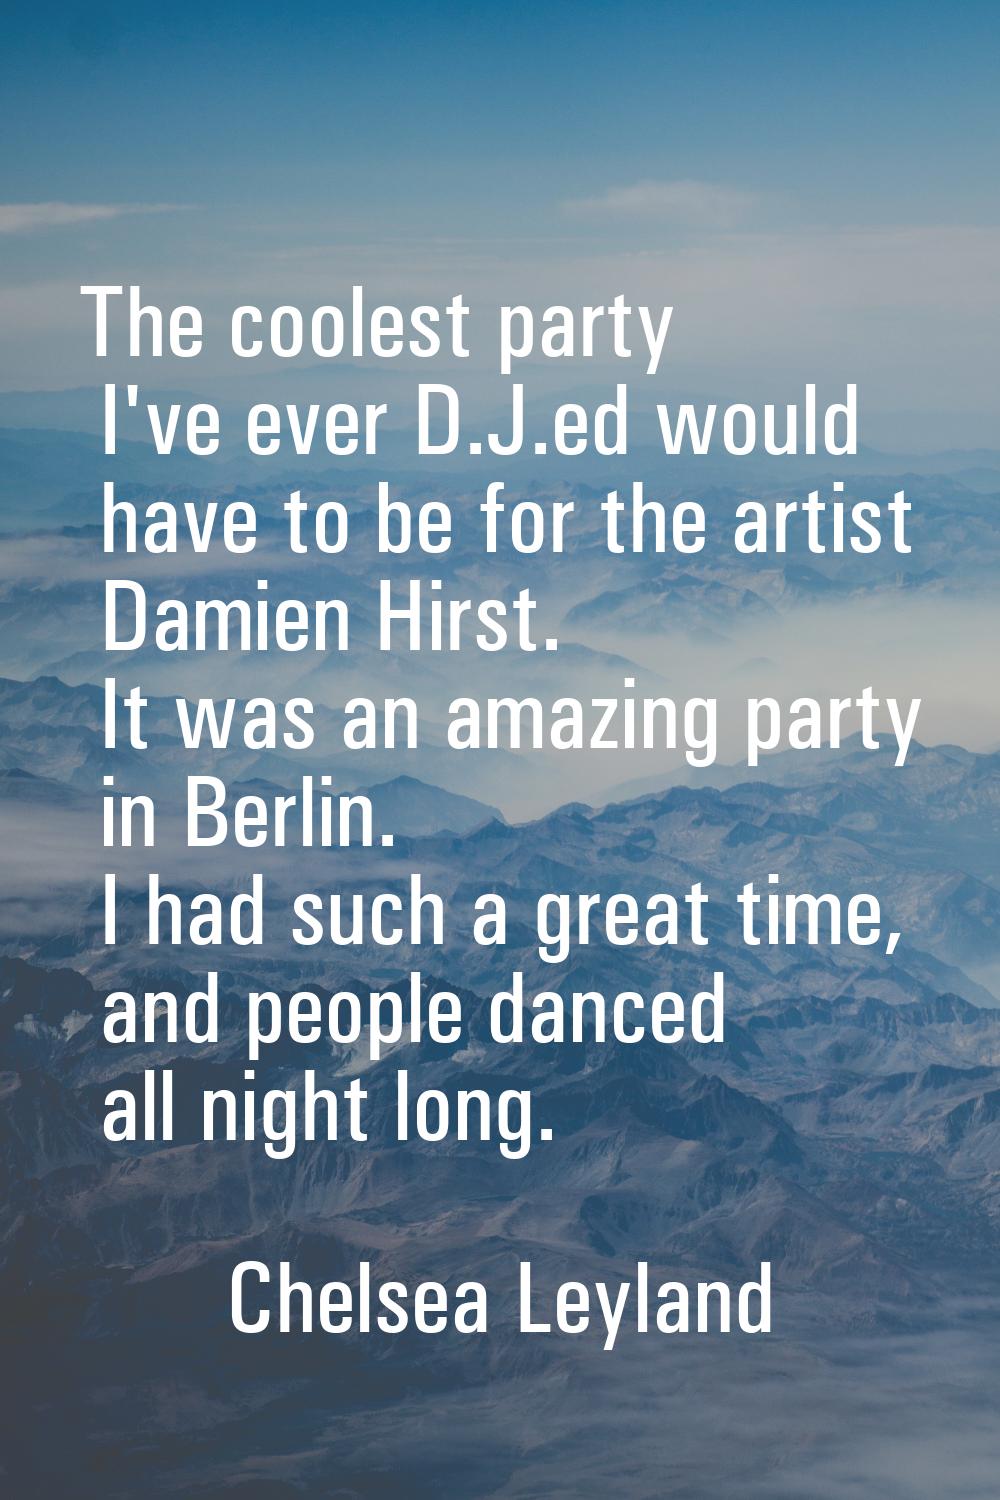 The coolest party I've ever D.J.ed would have to be for the artist Damien Hirst. It was an amazing 